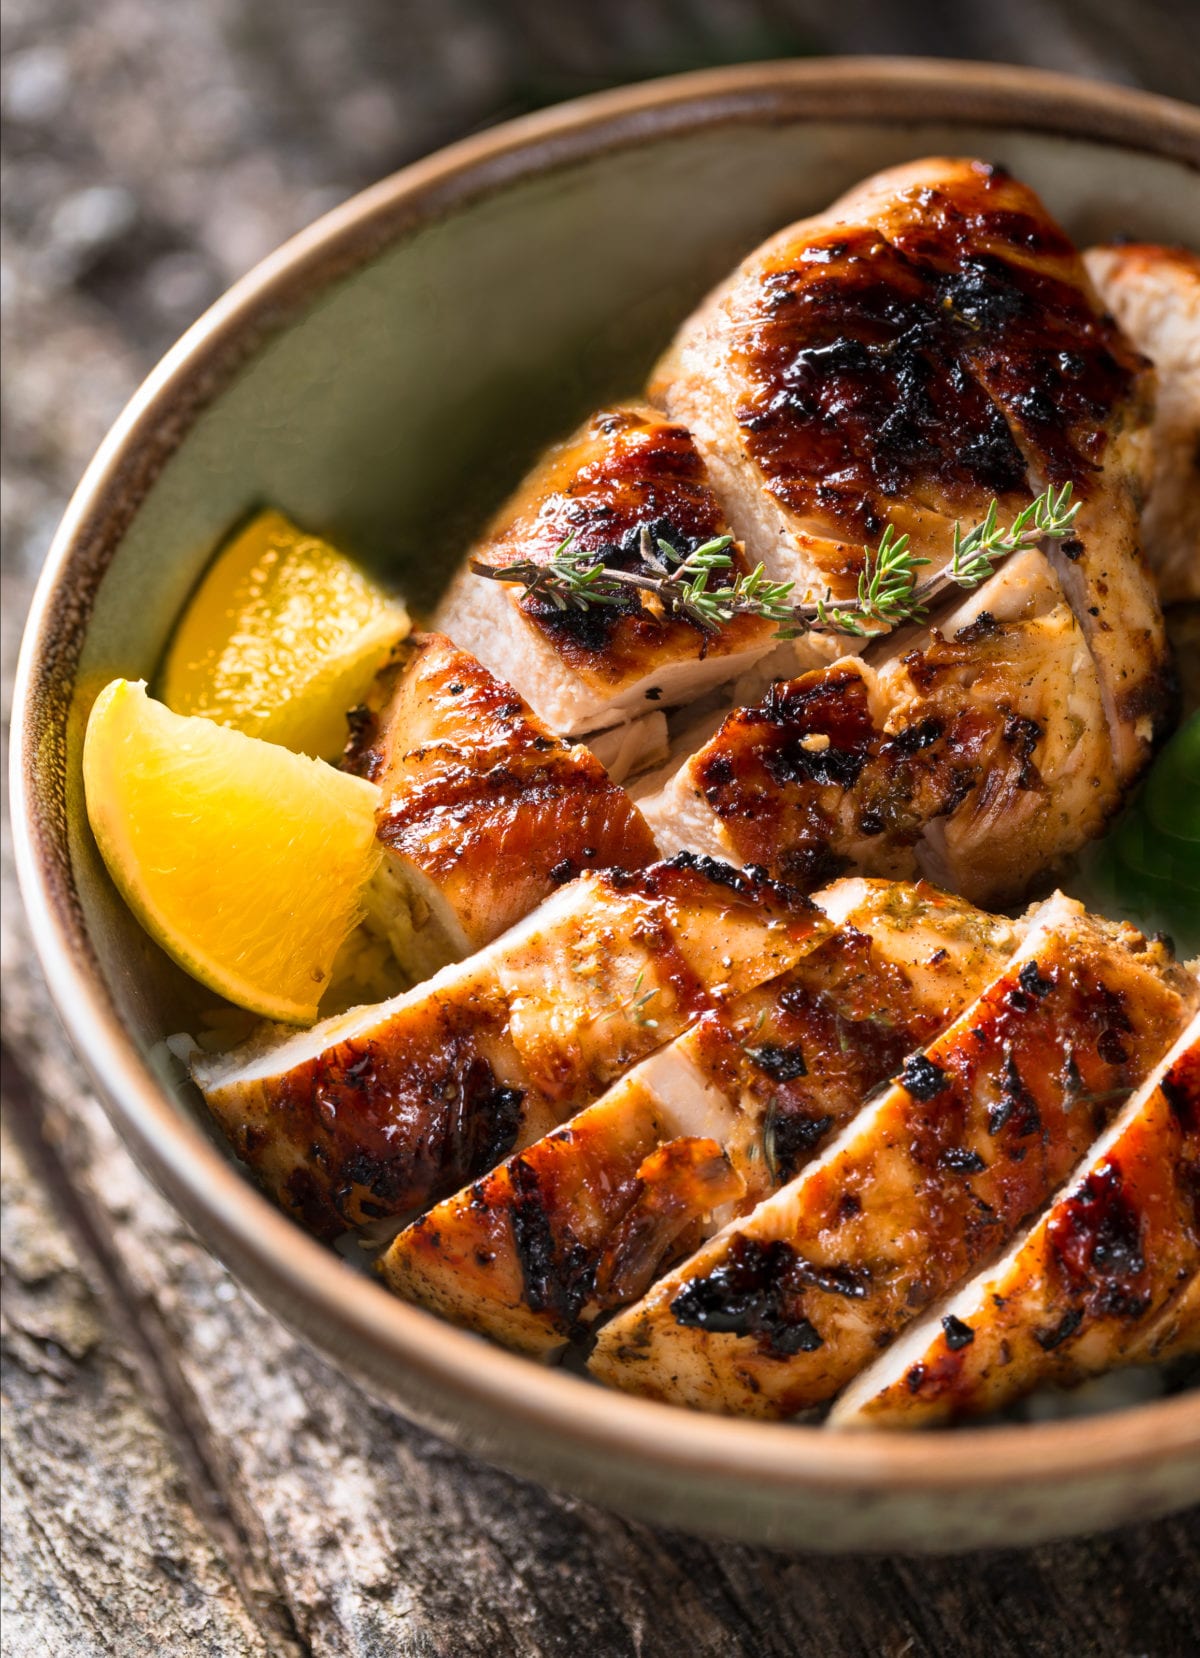 The Secret to Making Perfect Chicken Every Time